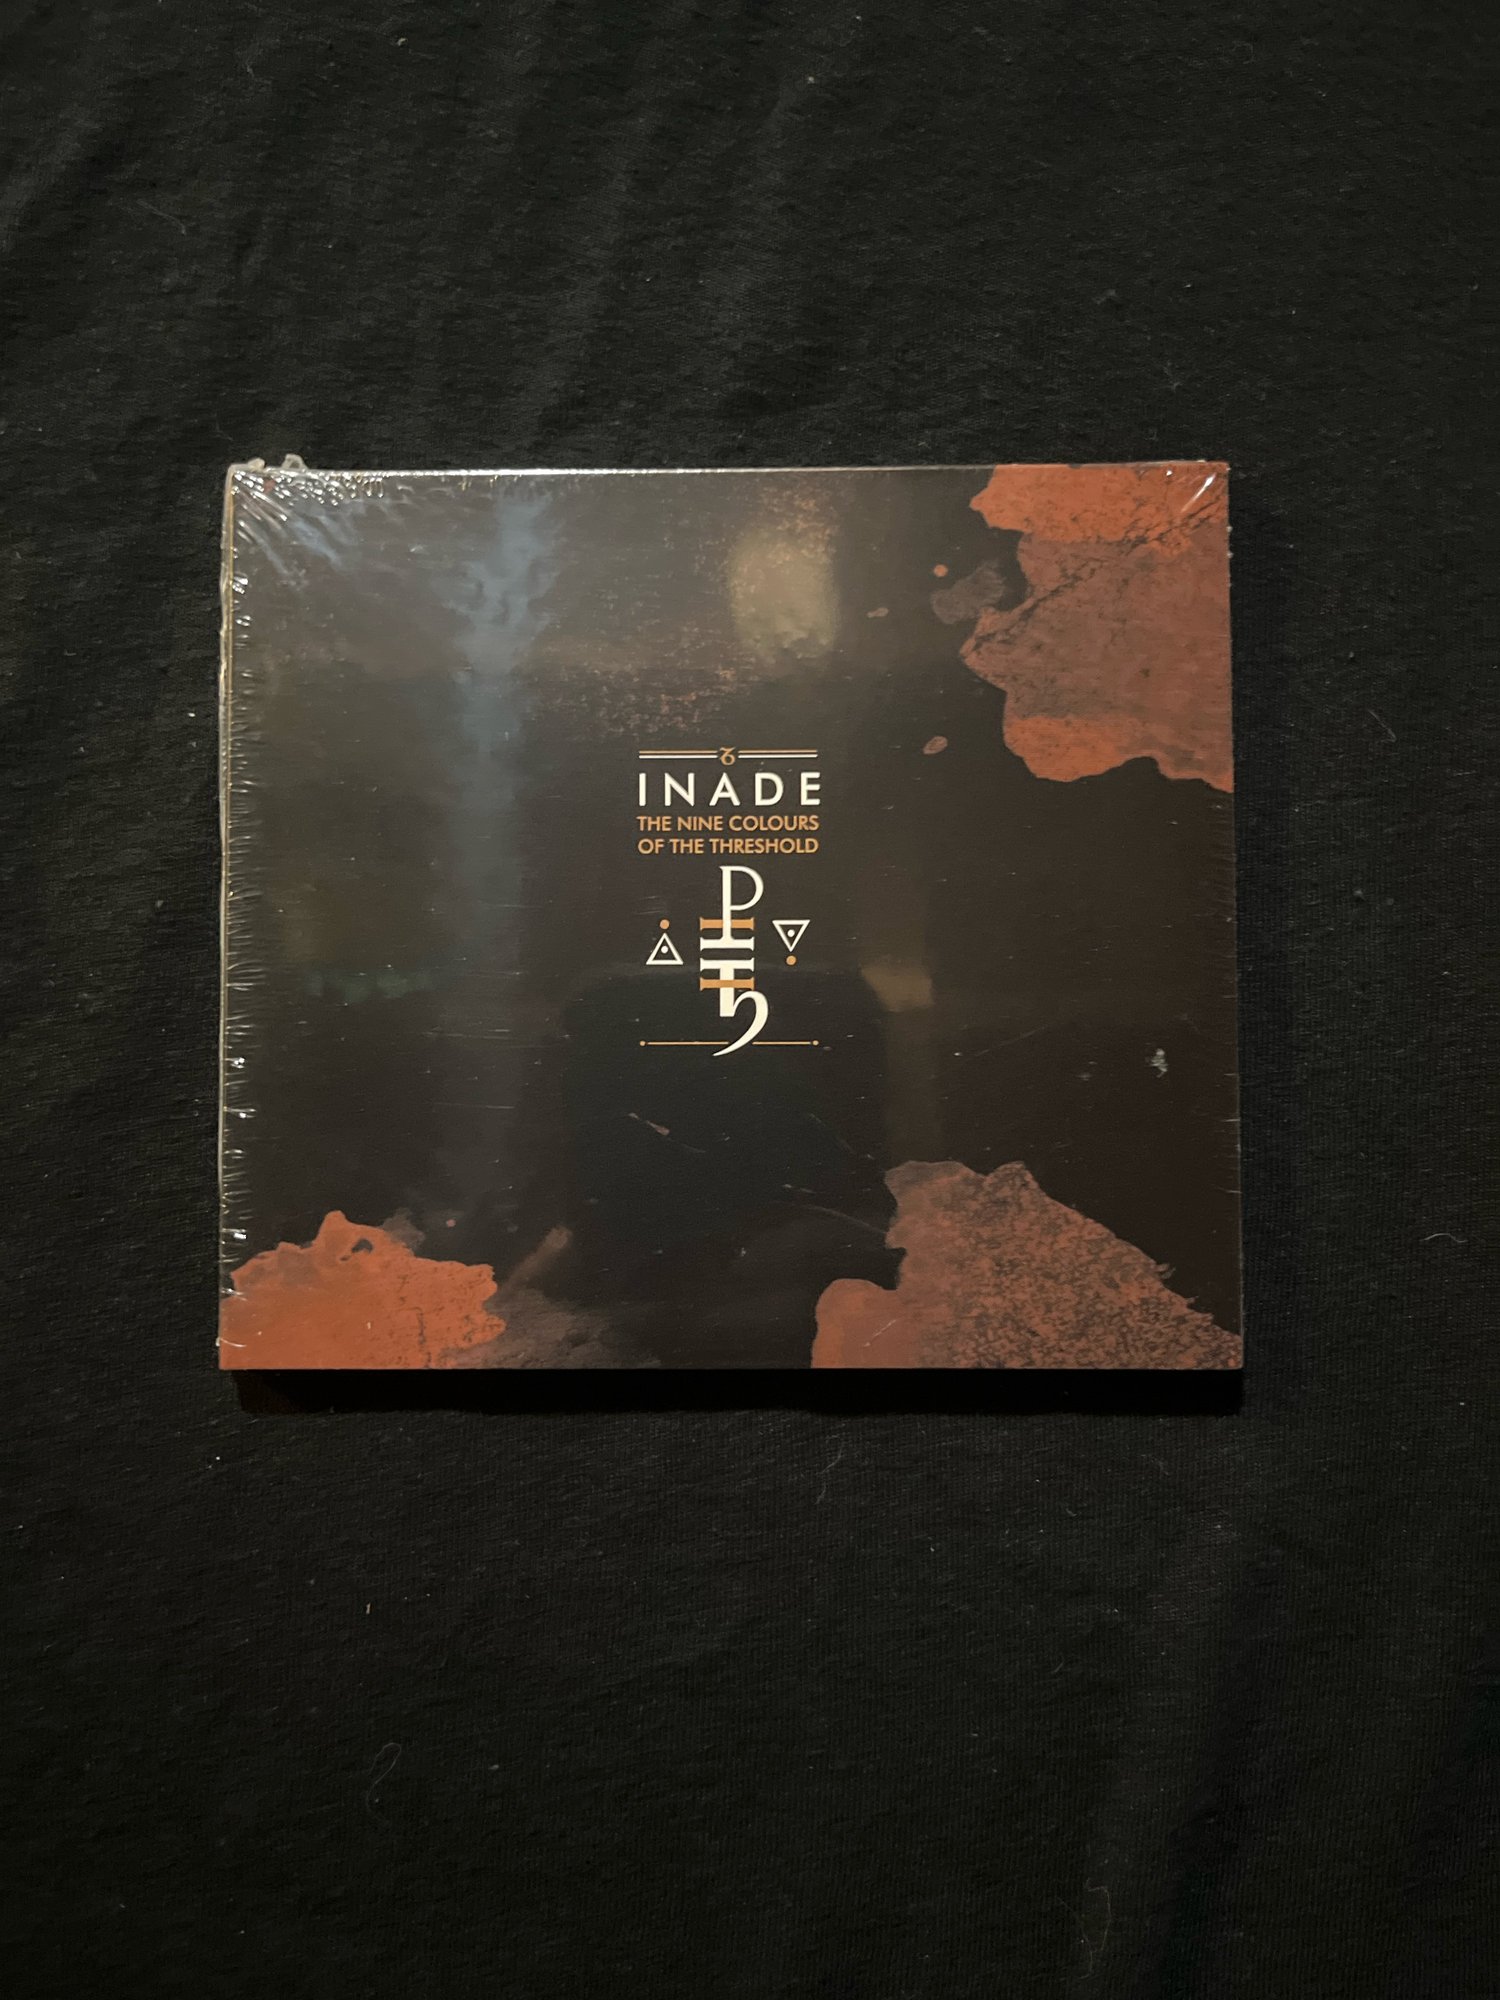 Inade - The Nine Colours Of The Threshold CD (Loki)